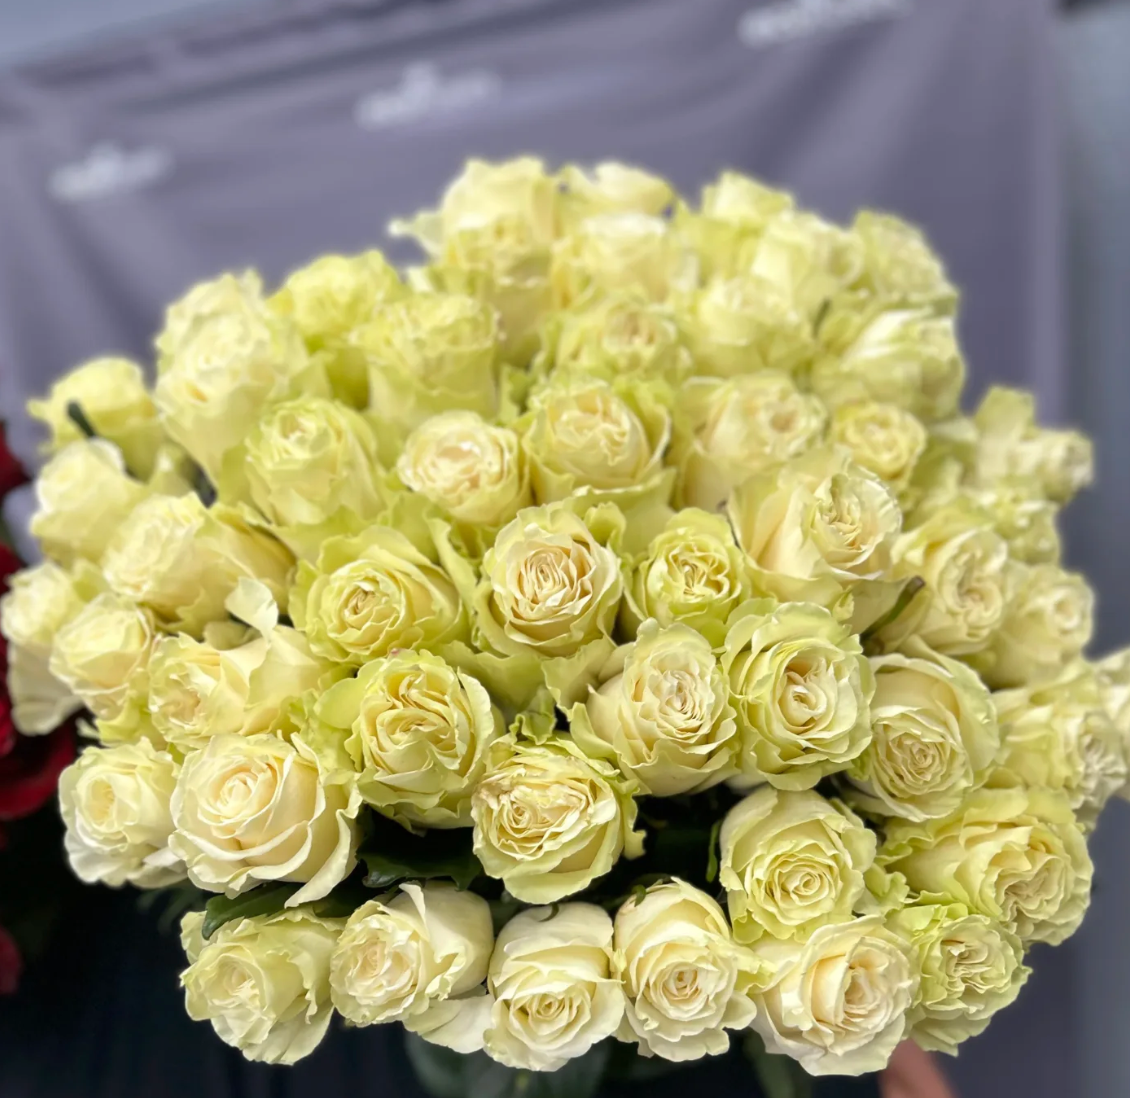 CharmingMondial roses, showcasing the elegance of delicate roses in a charming bouquet Glendale Flowers